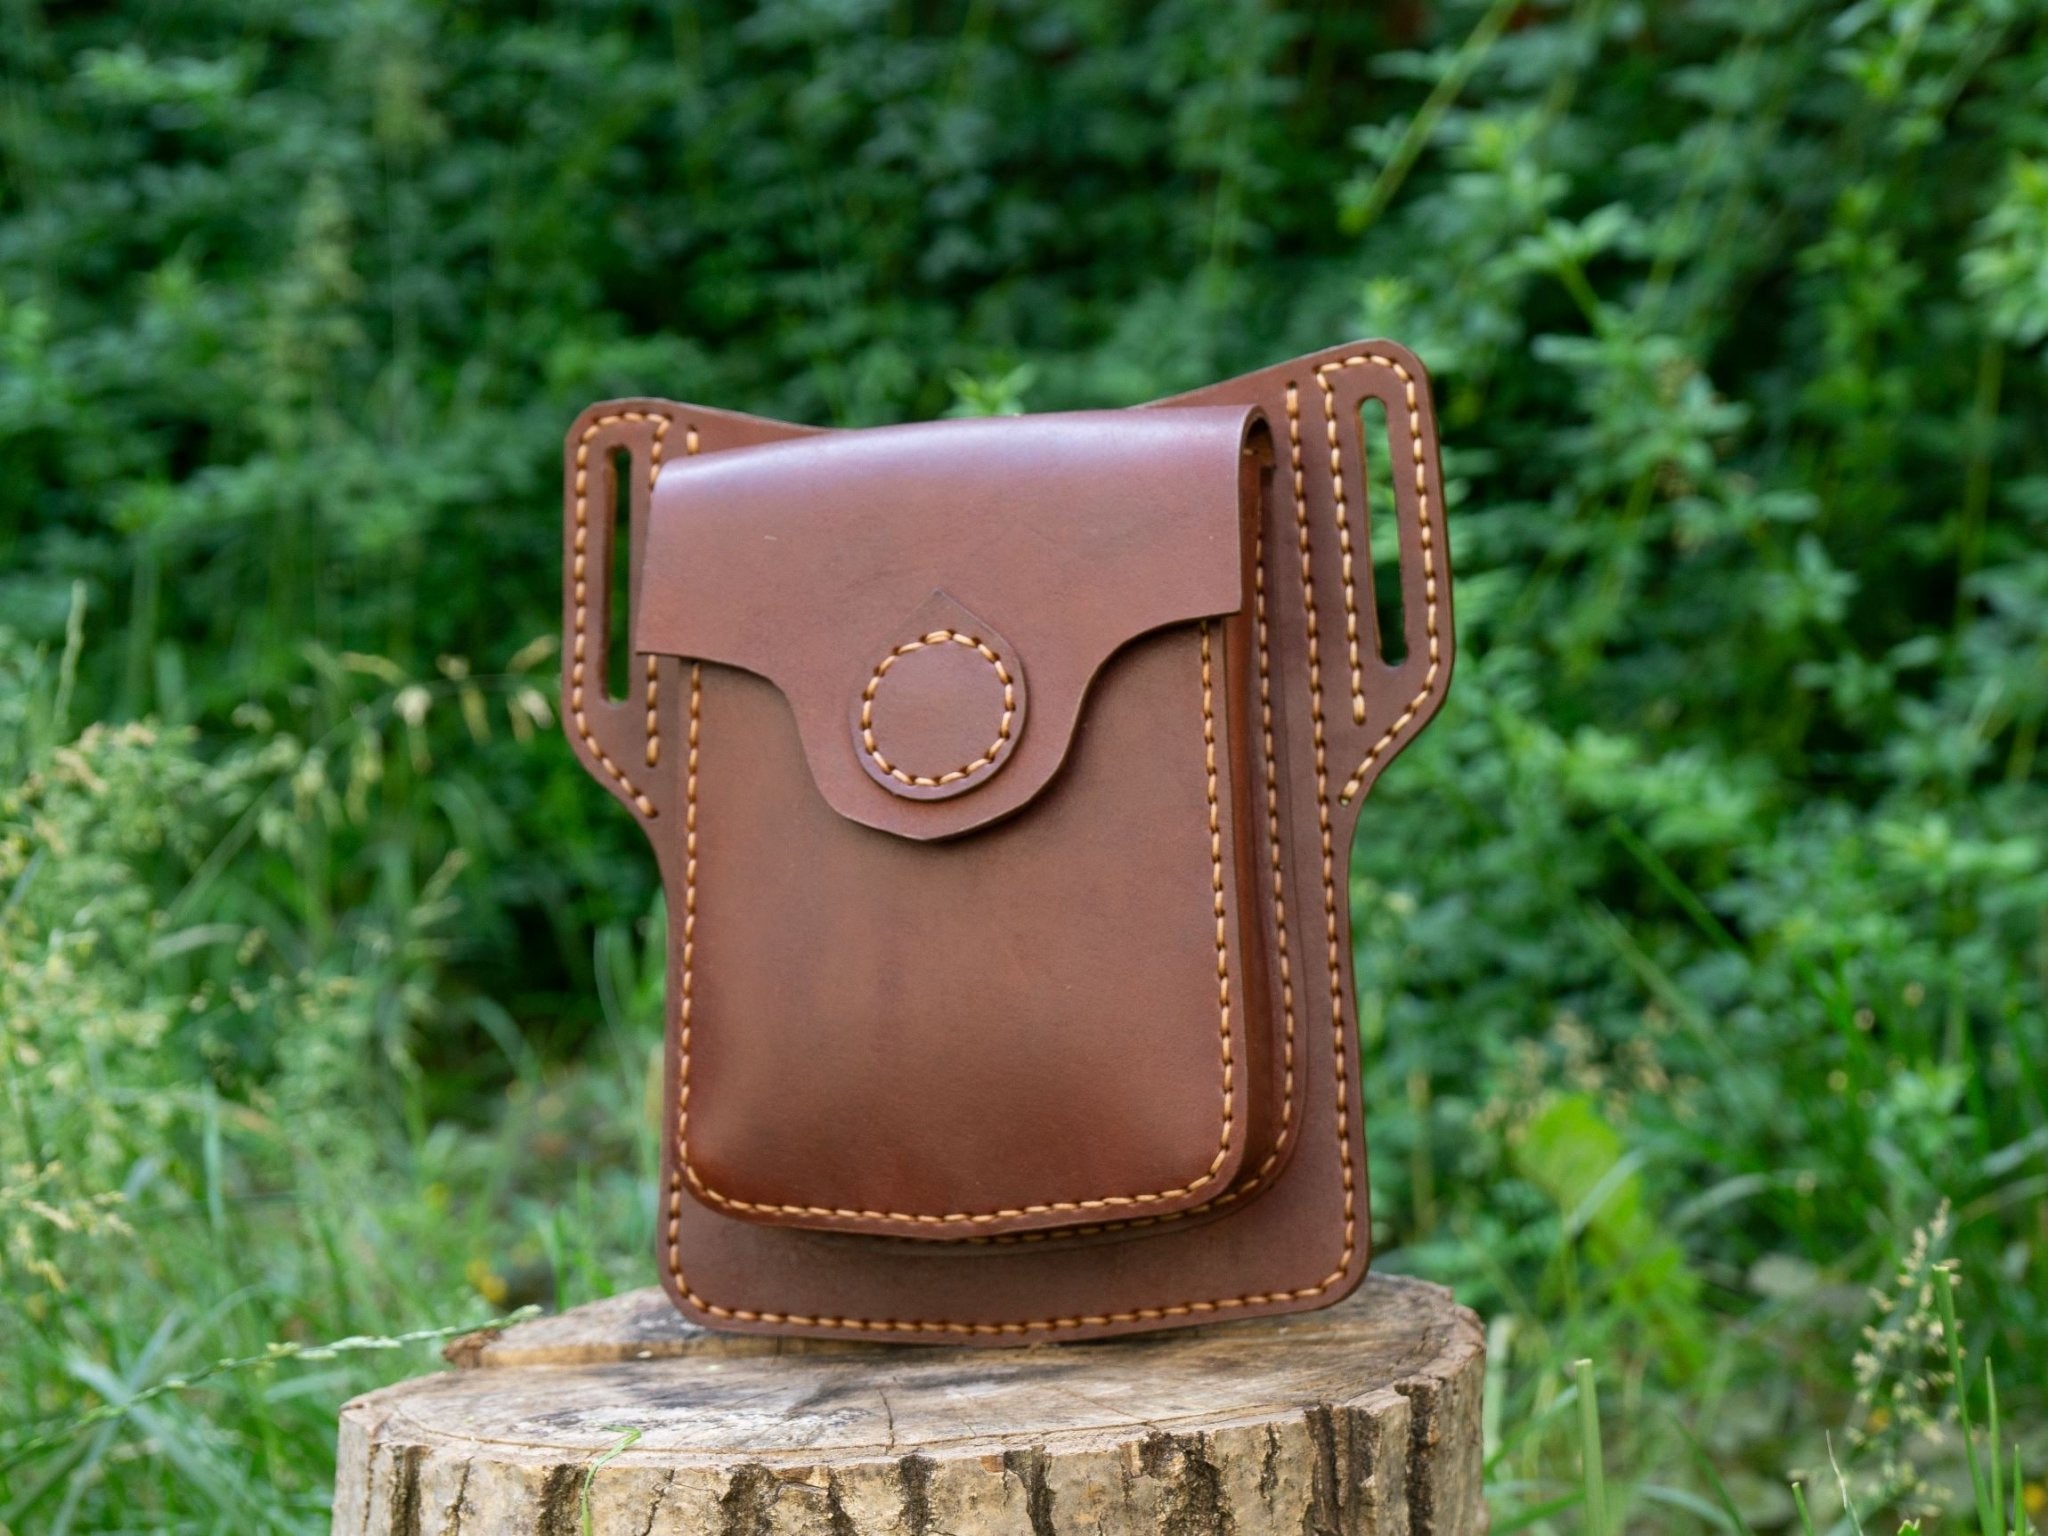 How to Make a Leather Hip Bag - Tutorial and Pattern Download 